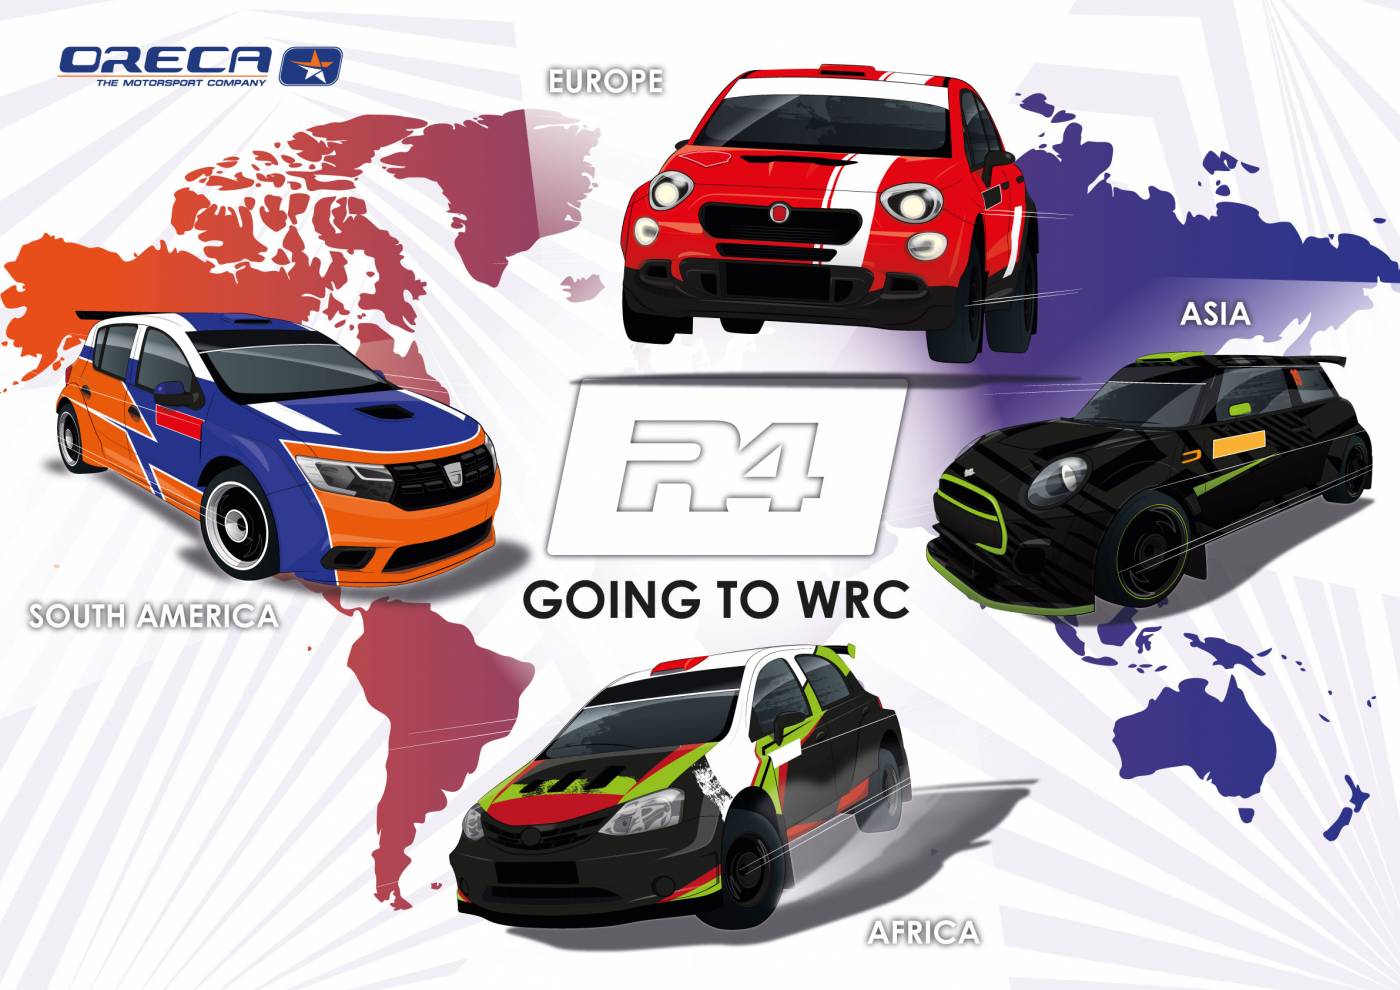 FIA R4 Kit to be accepted in World Rally Championship from 2020